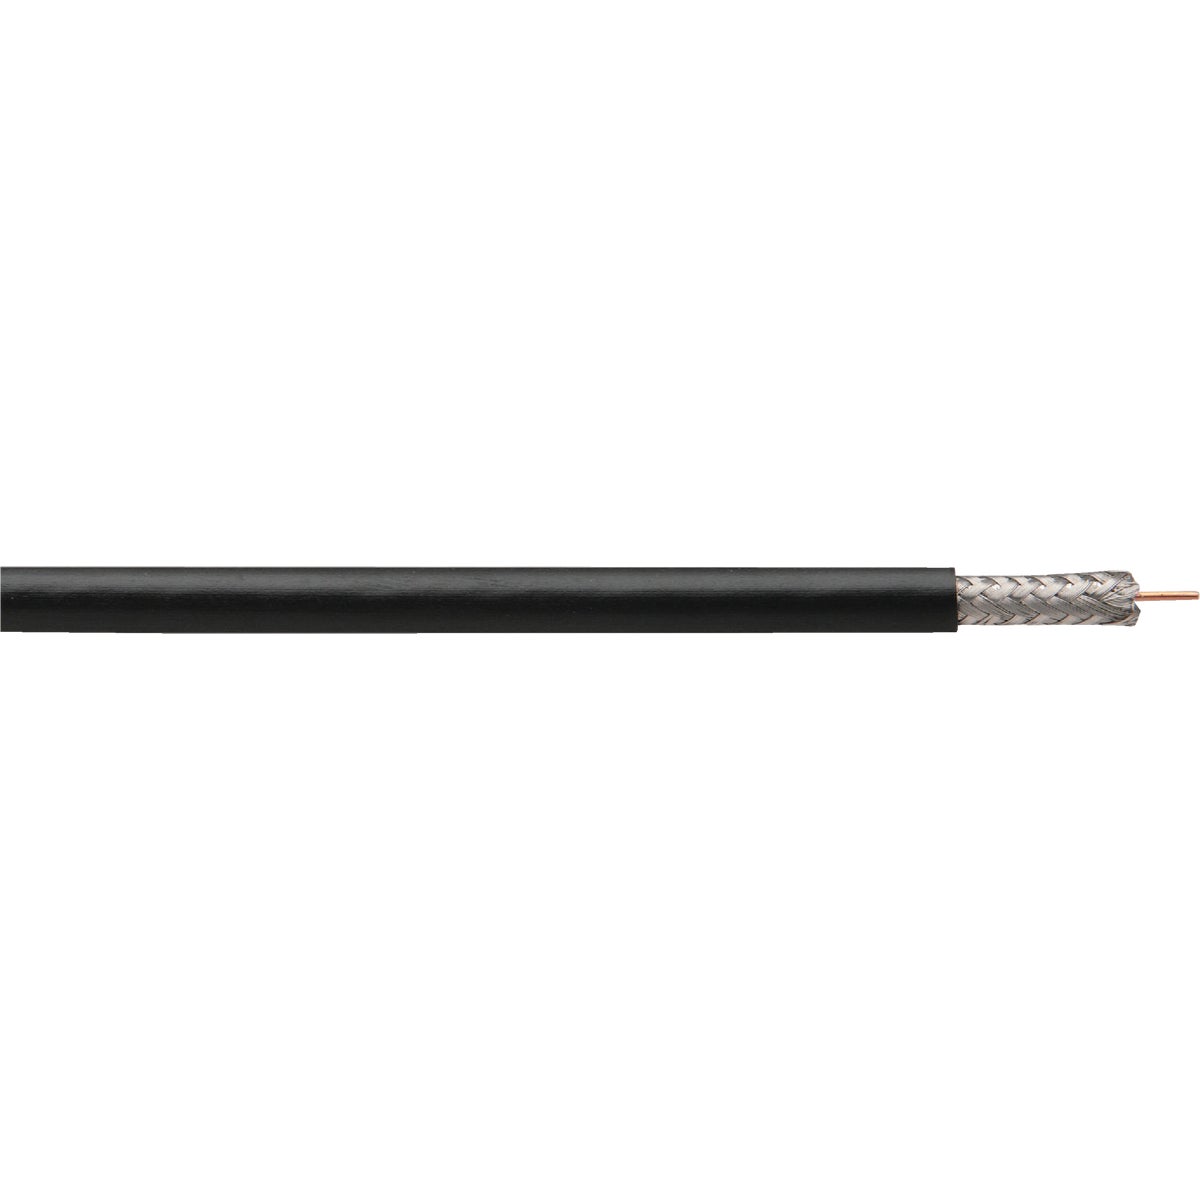 Coleman Cable 920084608 Coleman Cable 1000 Ft. Black Dual Shielded RG6 Coaxial Cable 920084608